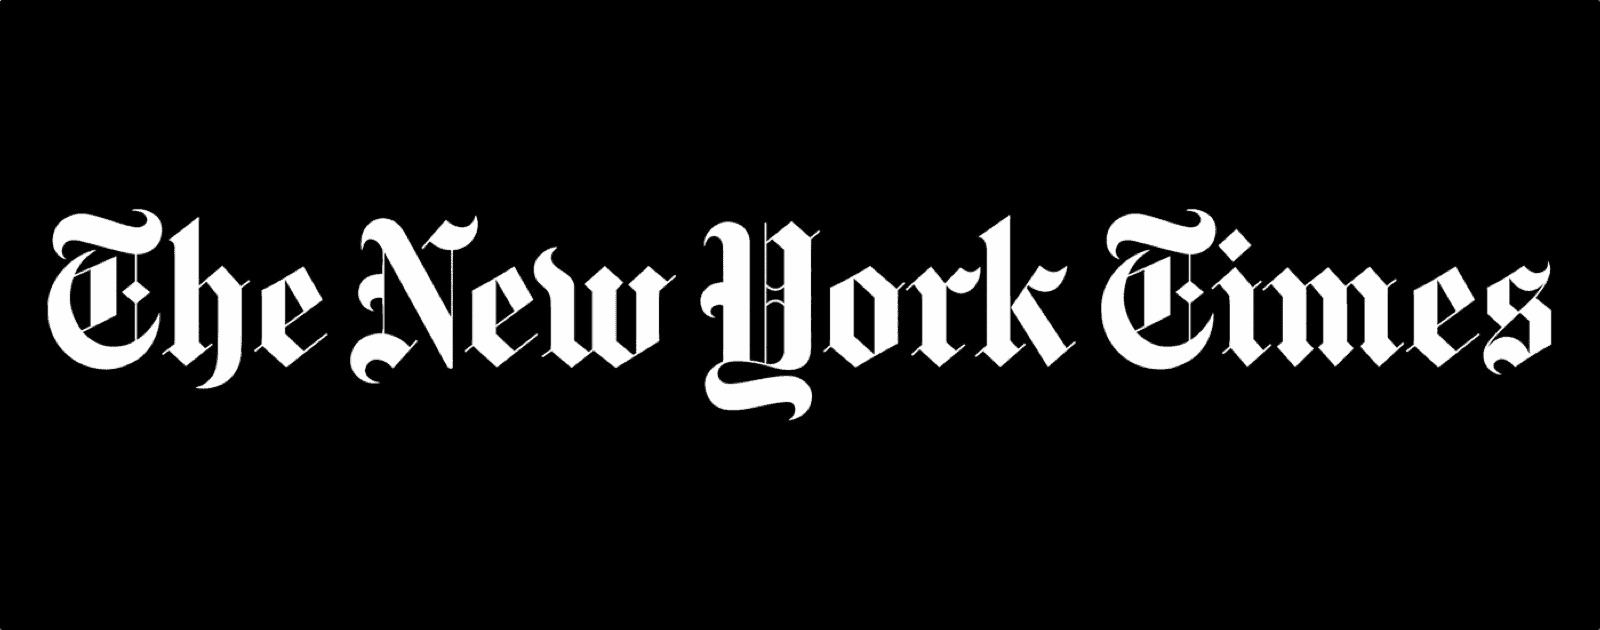 New York Times App Now Updated With Personalized News Feed